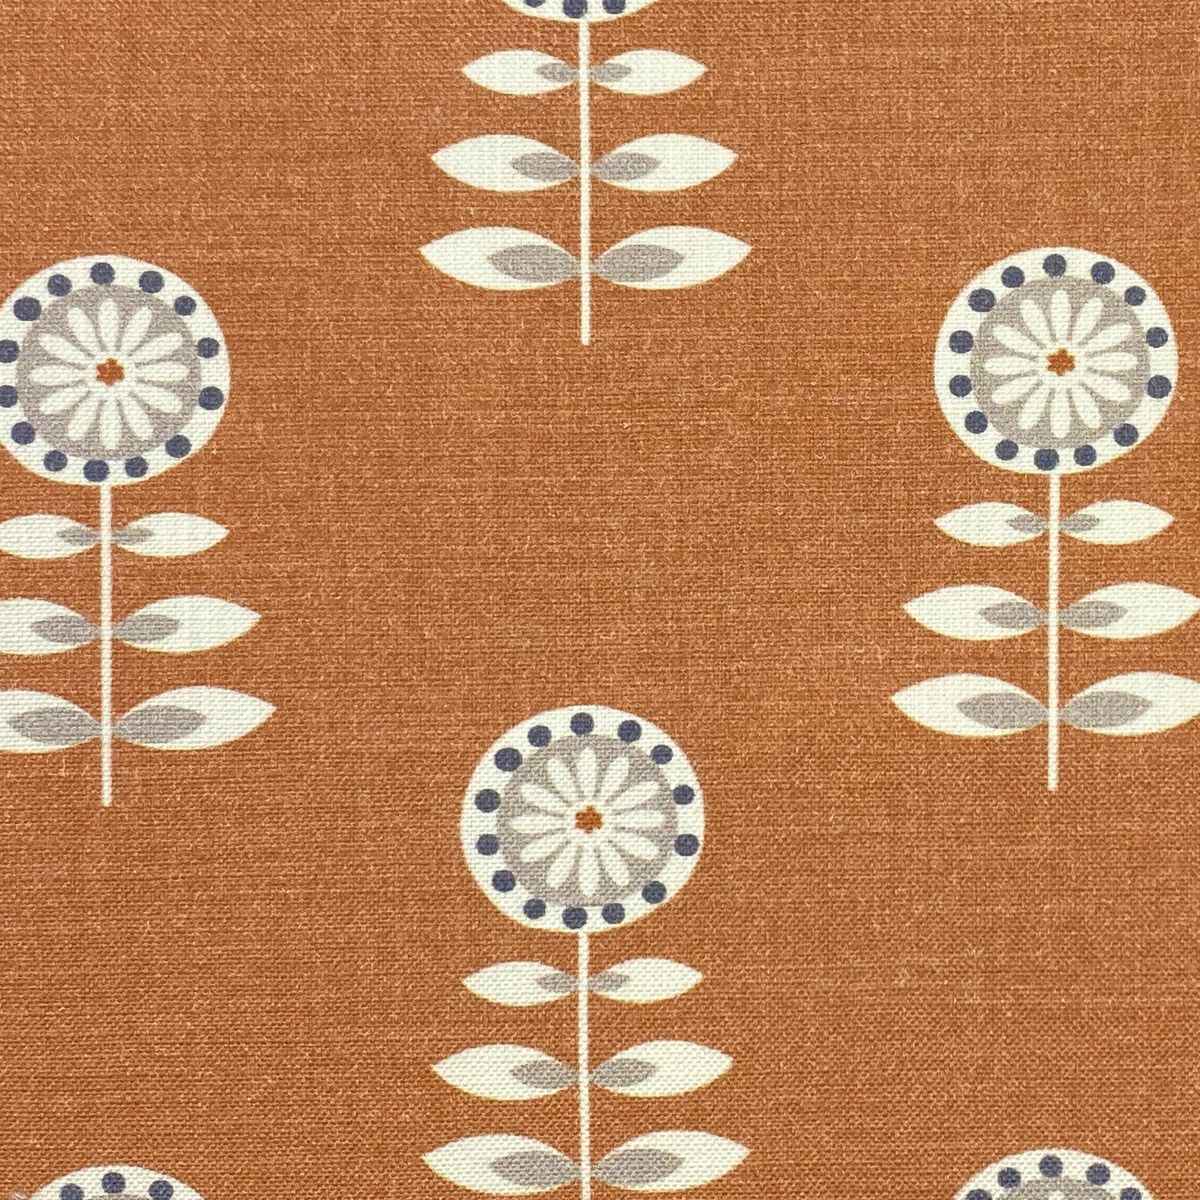 Rushock Tangerine Fabric by Chatham Glyn